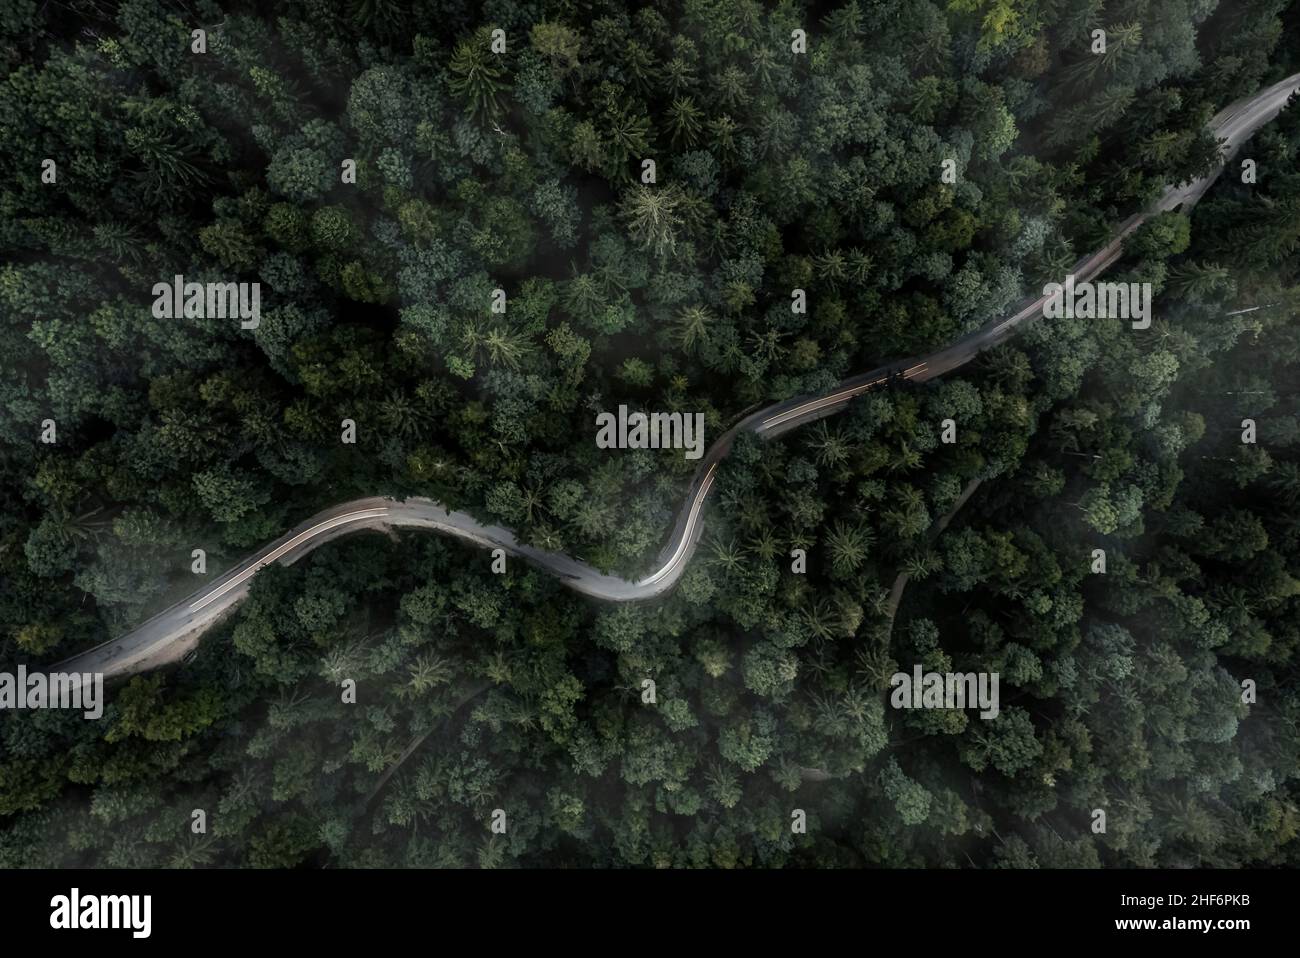 Winding curvy road inside a forest from a top down view of a drone at a foggy evening with a car backlight Stock Photo